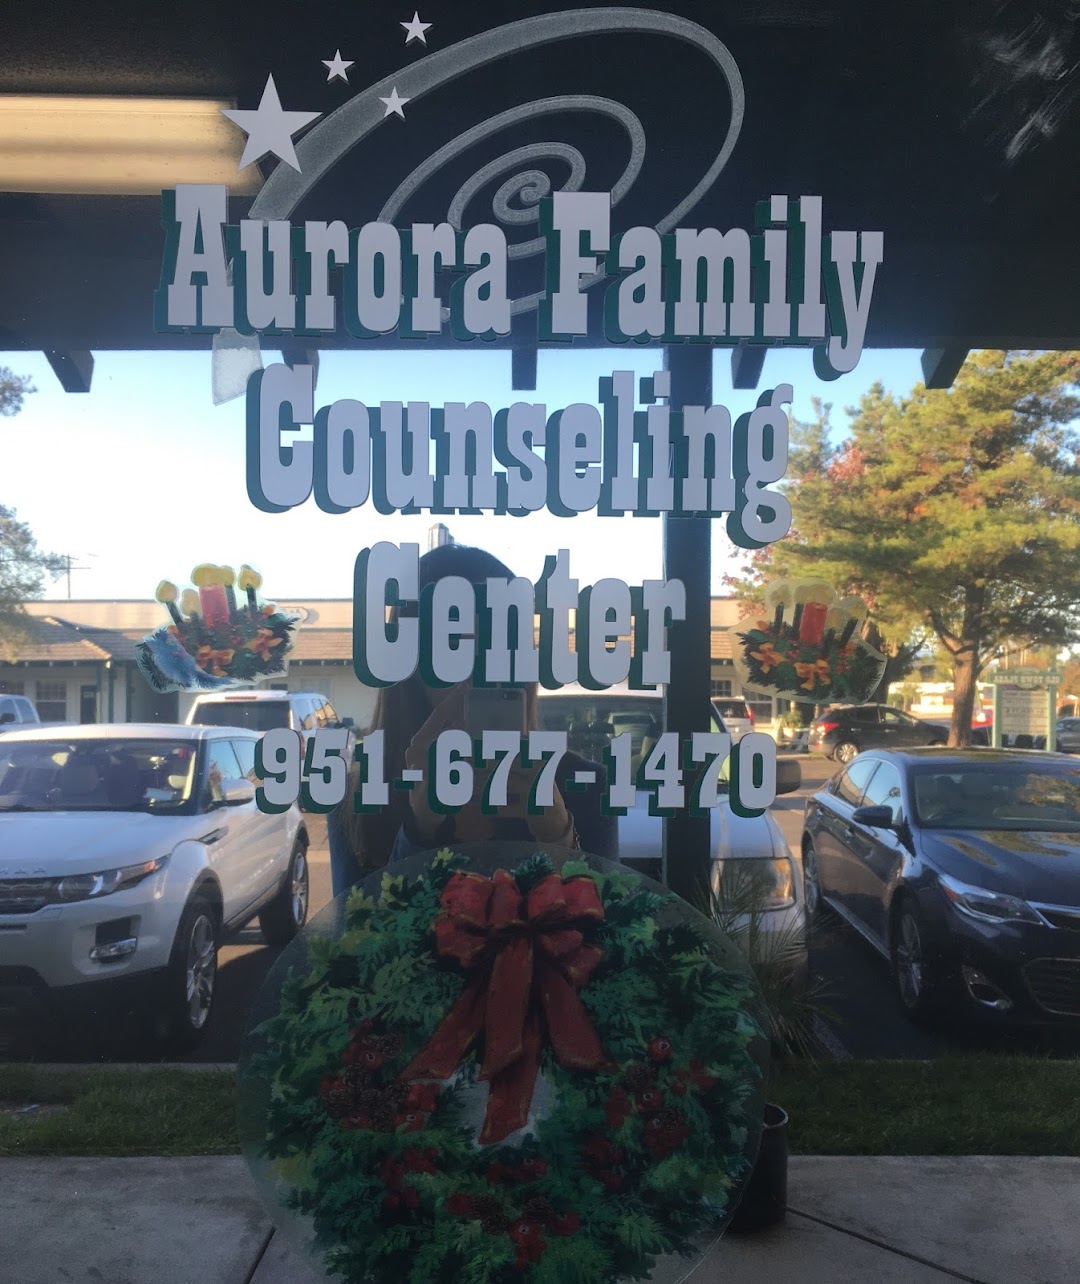 Aurora Family Counseling Center